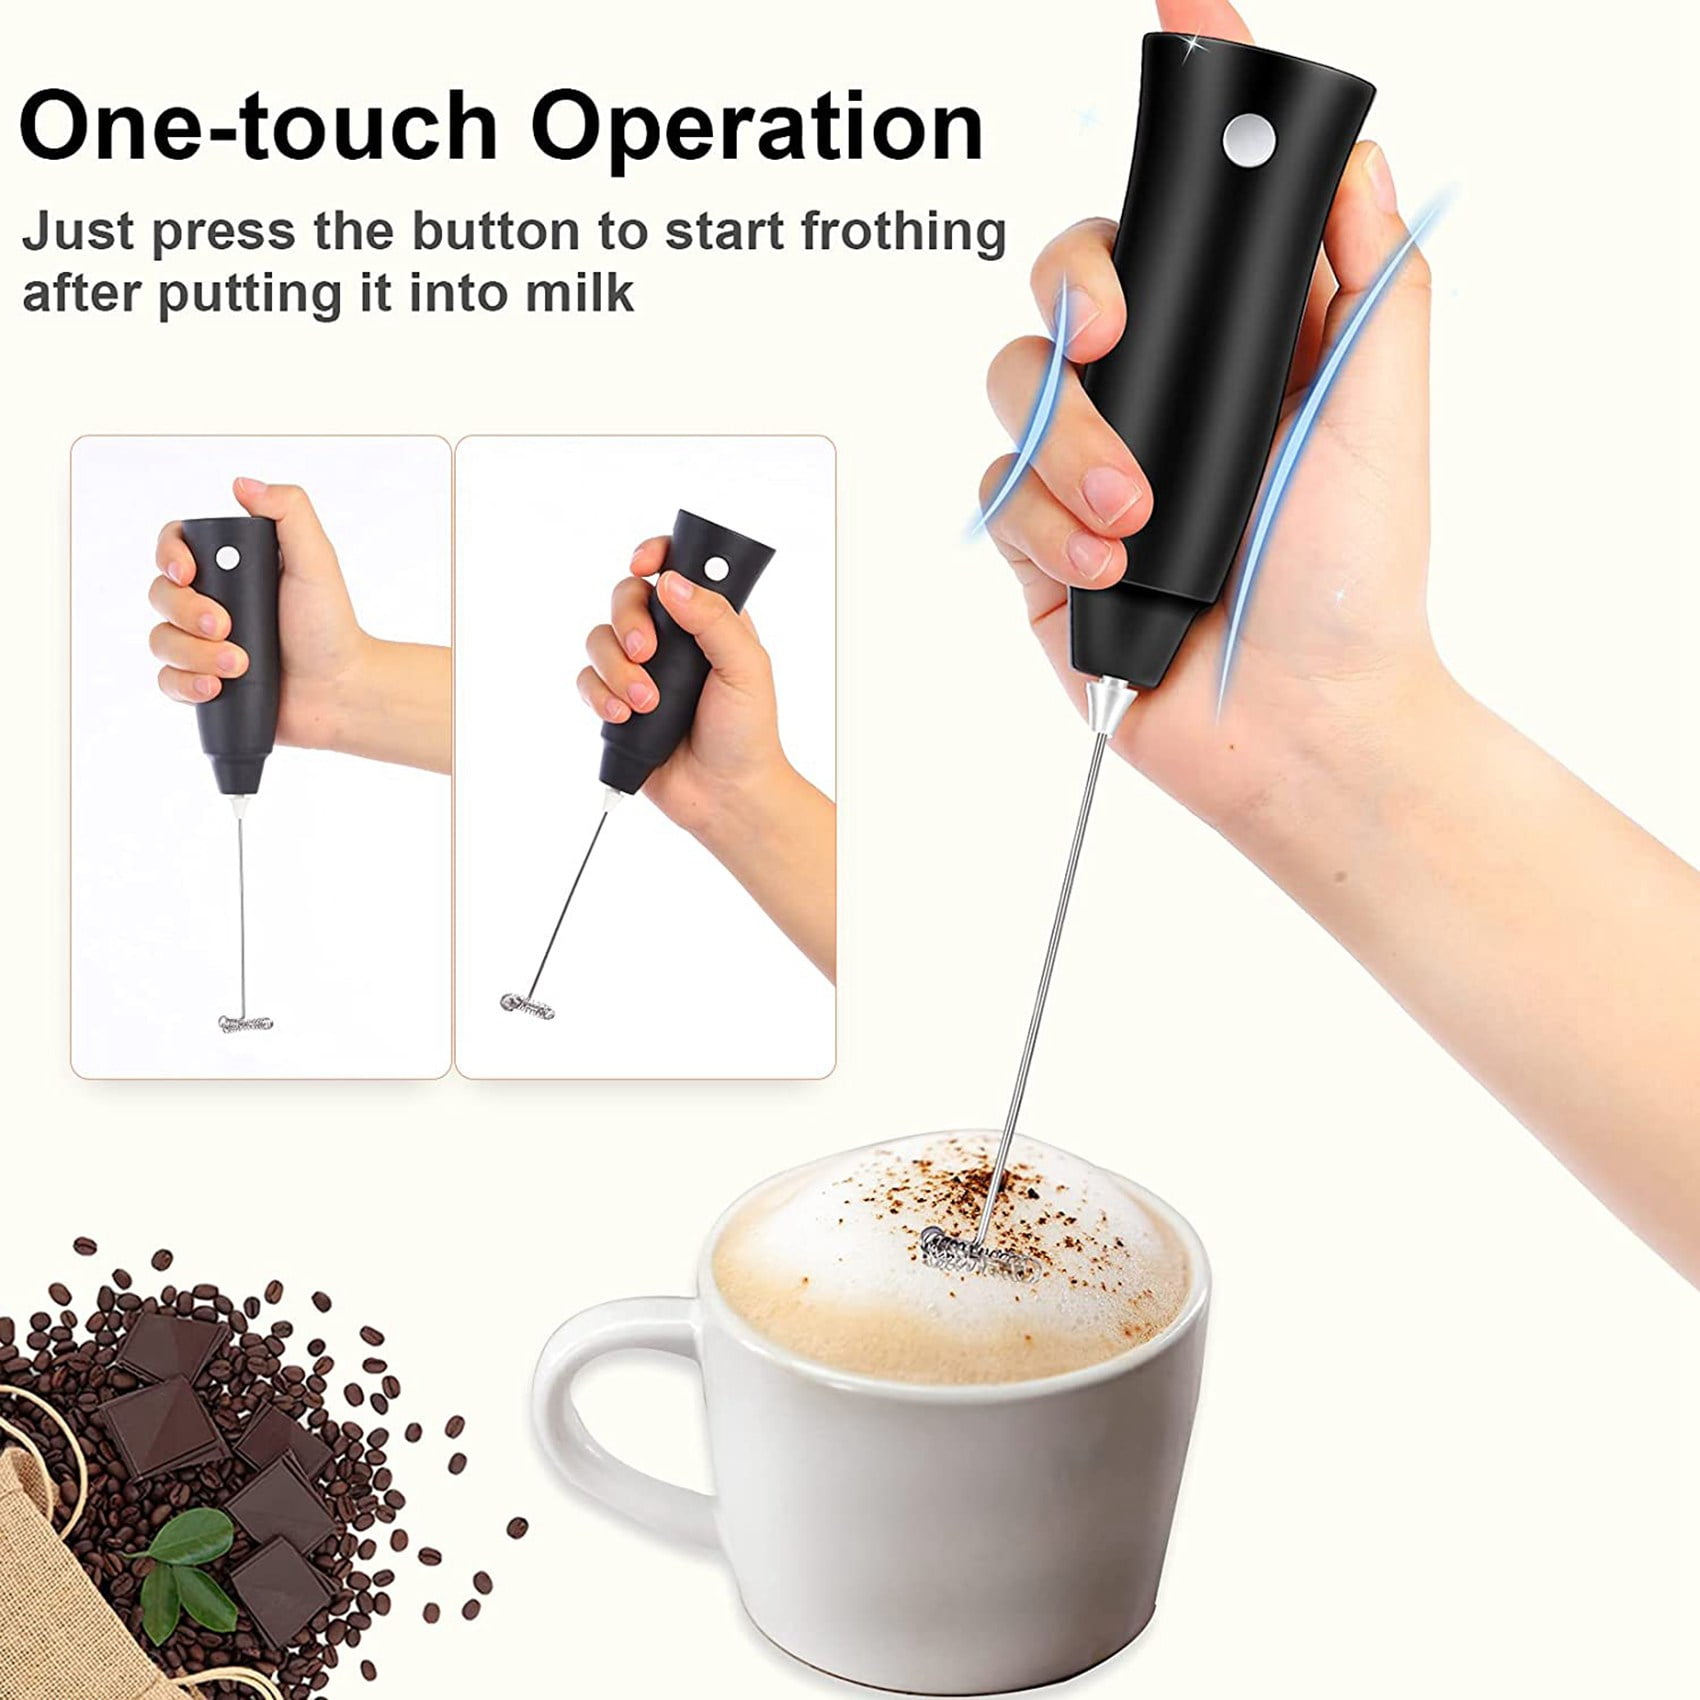 PowerLix Milk Frother Handheld Battery Operated Electric Whisk Beater Foam  Maker For Coffee, Latte, Cappuccino, Hot Chocolate, Durable Mini Drink  Mixer With Sta…